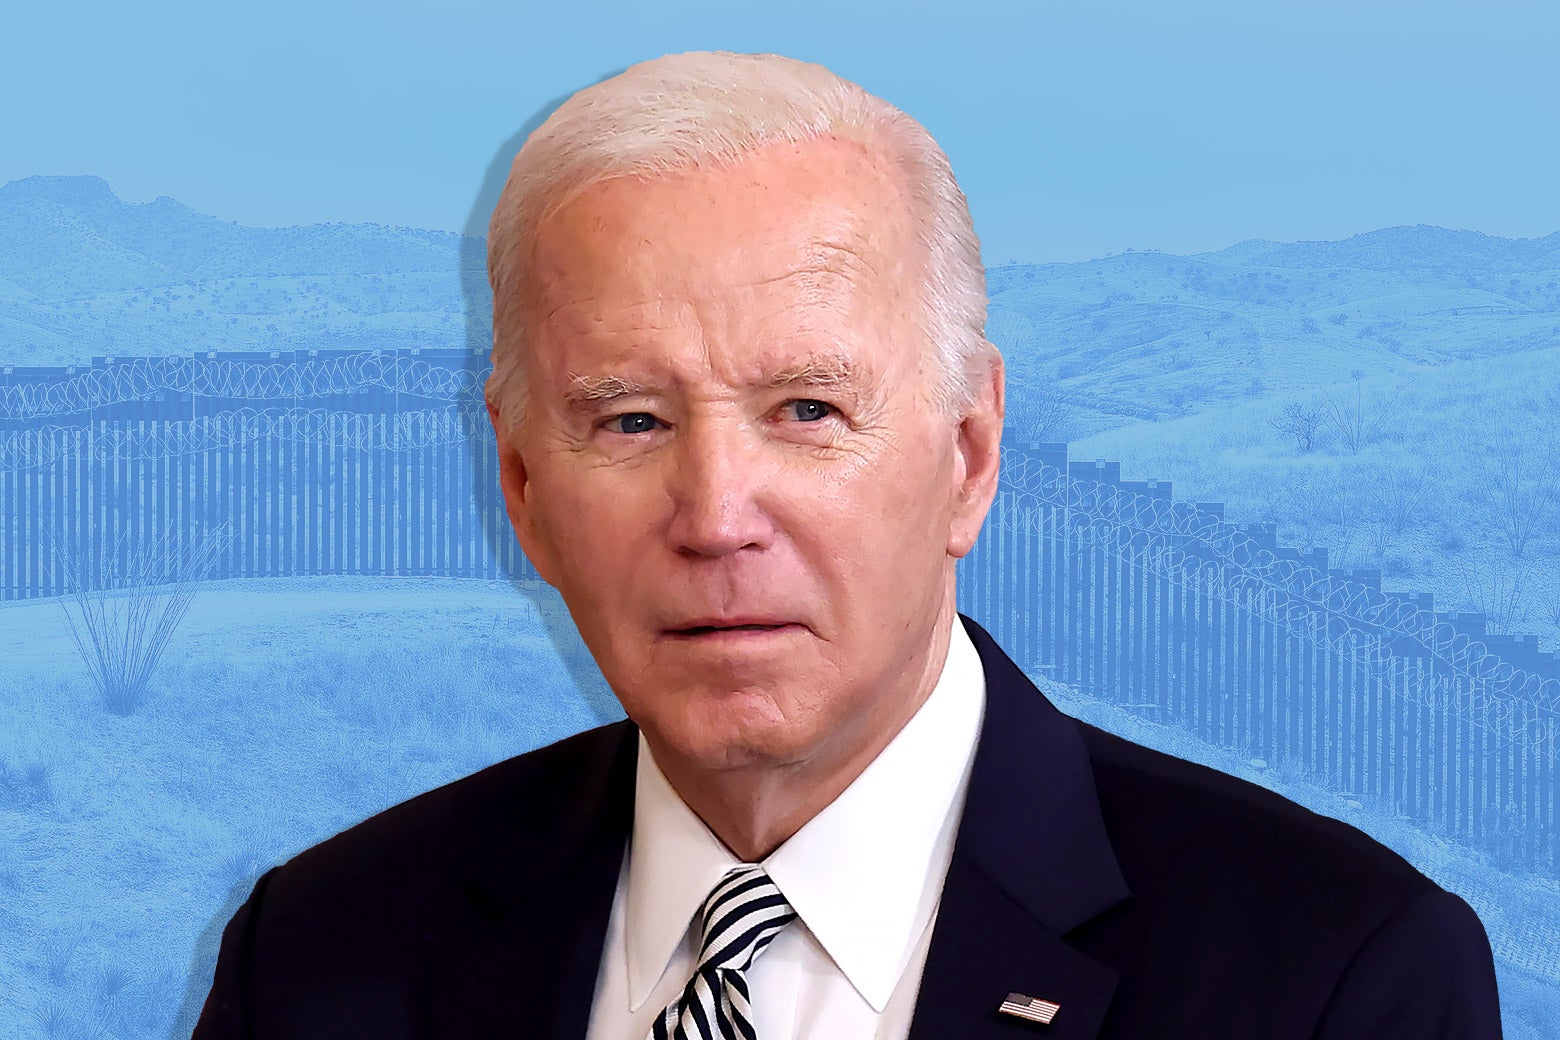 Joe Biden frowning, photoshopped in front of the border wall with Mexico.